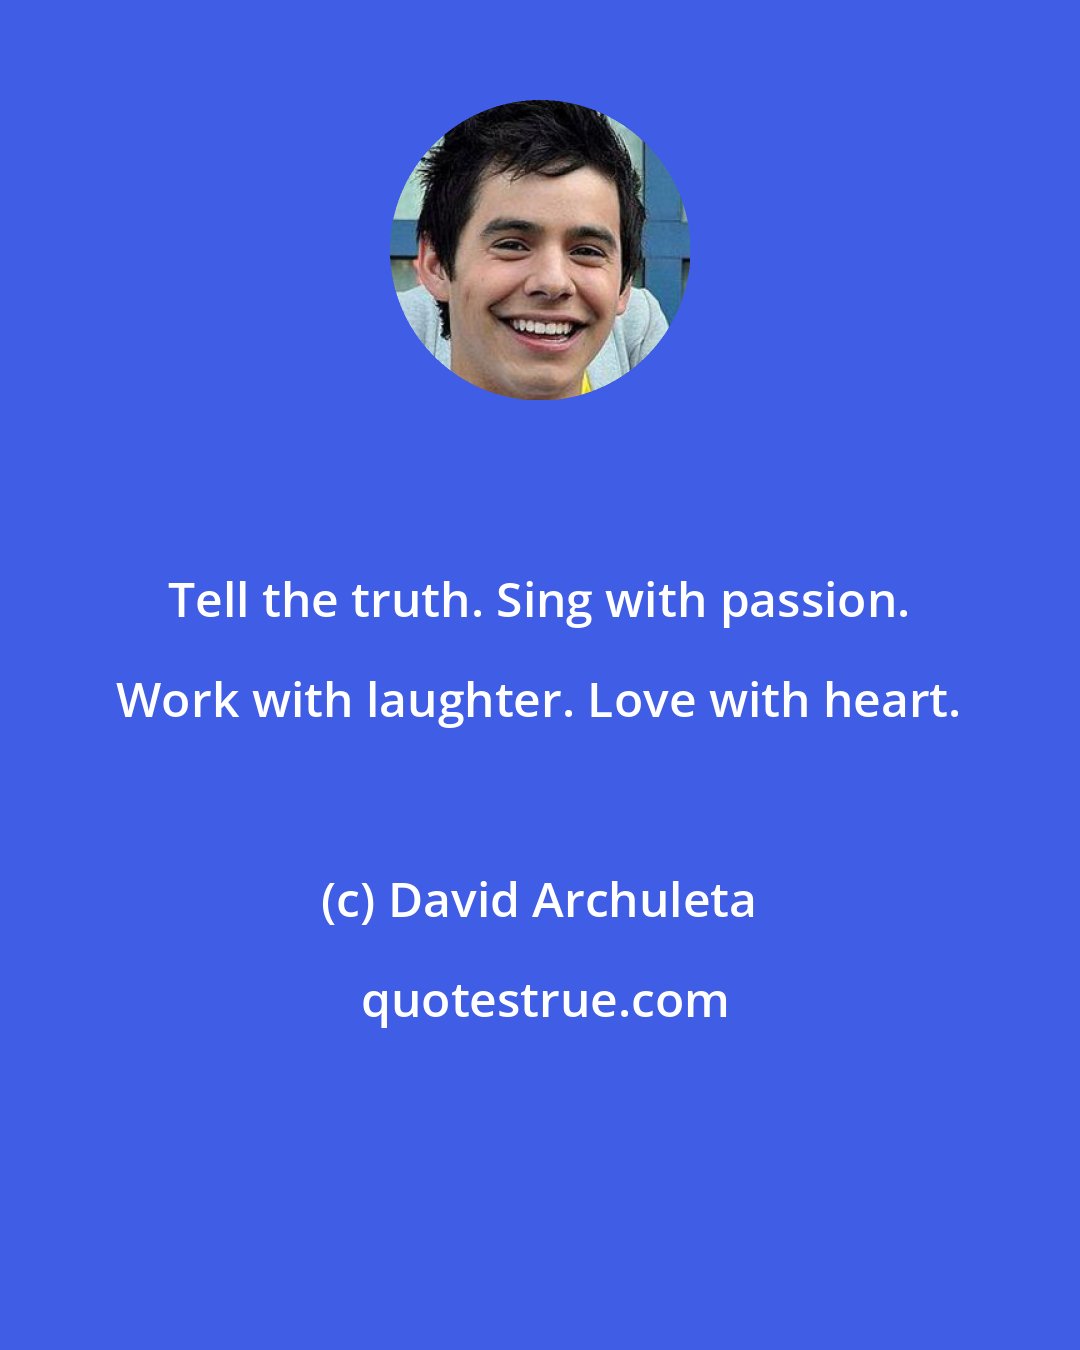 David Archuleta: Tell the truth. Sing with passion. Work with laughter. Love with heart.